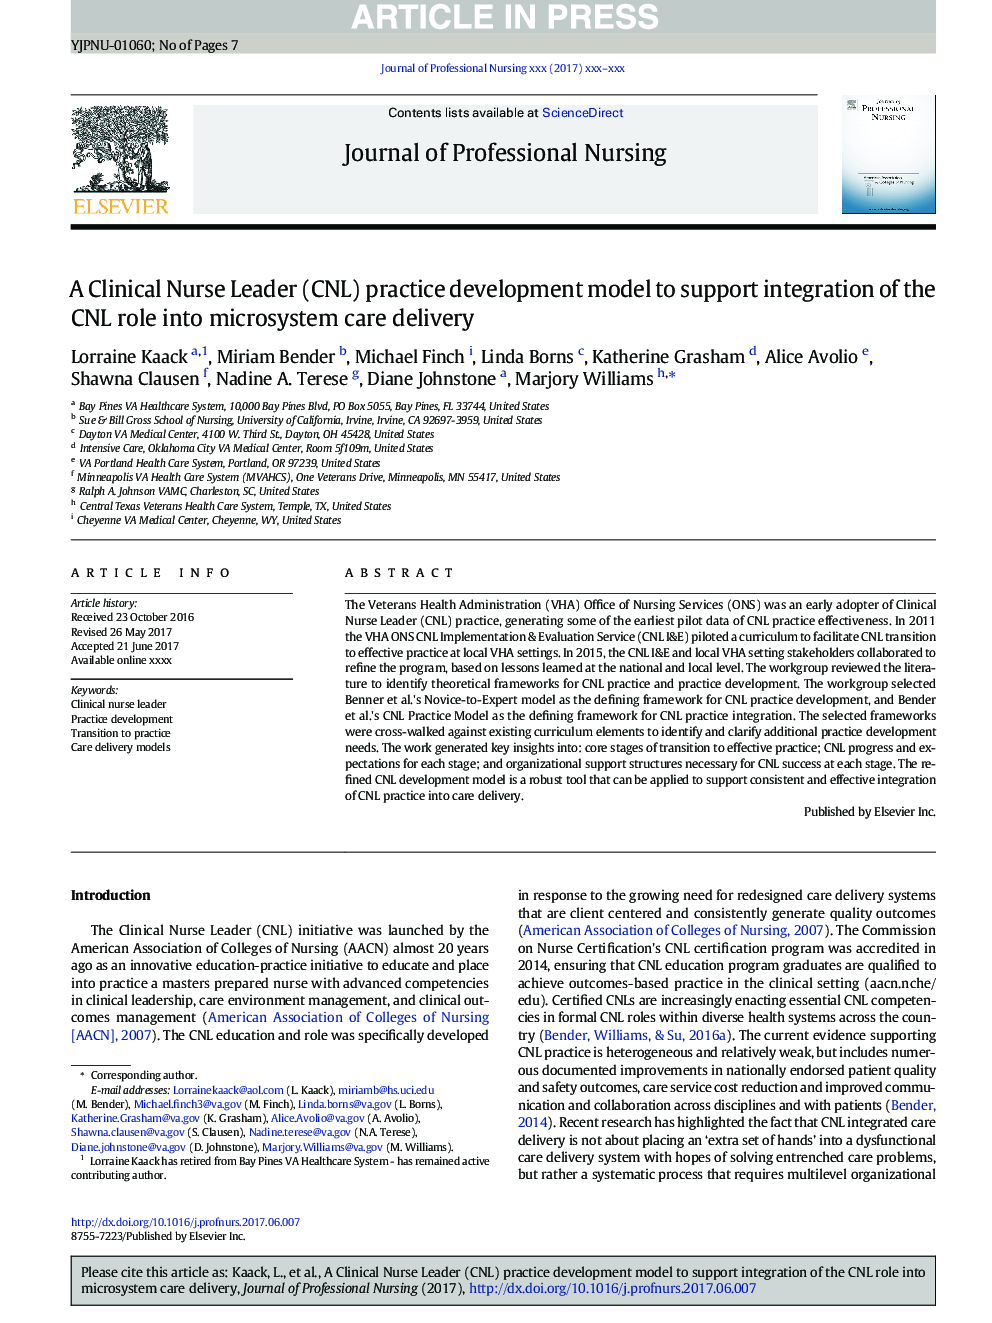 A Clinical Nurse Leader (CNL) practice development model to support integration of the CNL role into microsystem care delivery